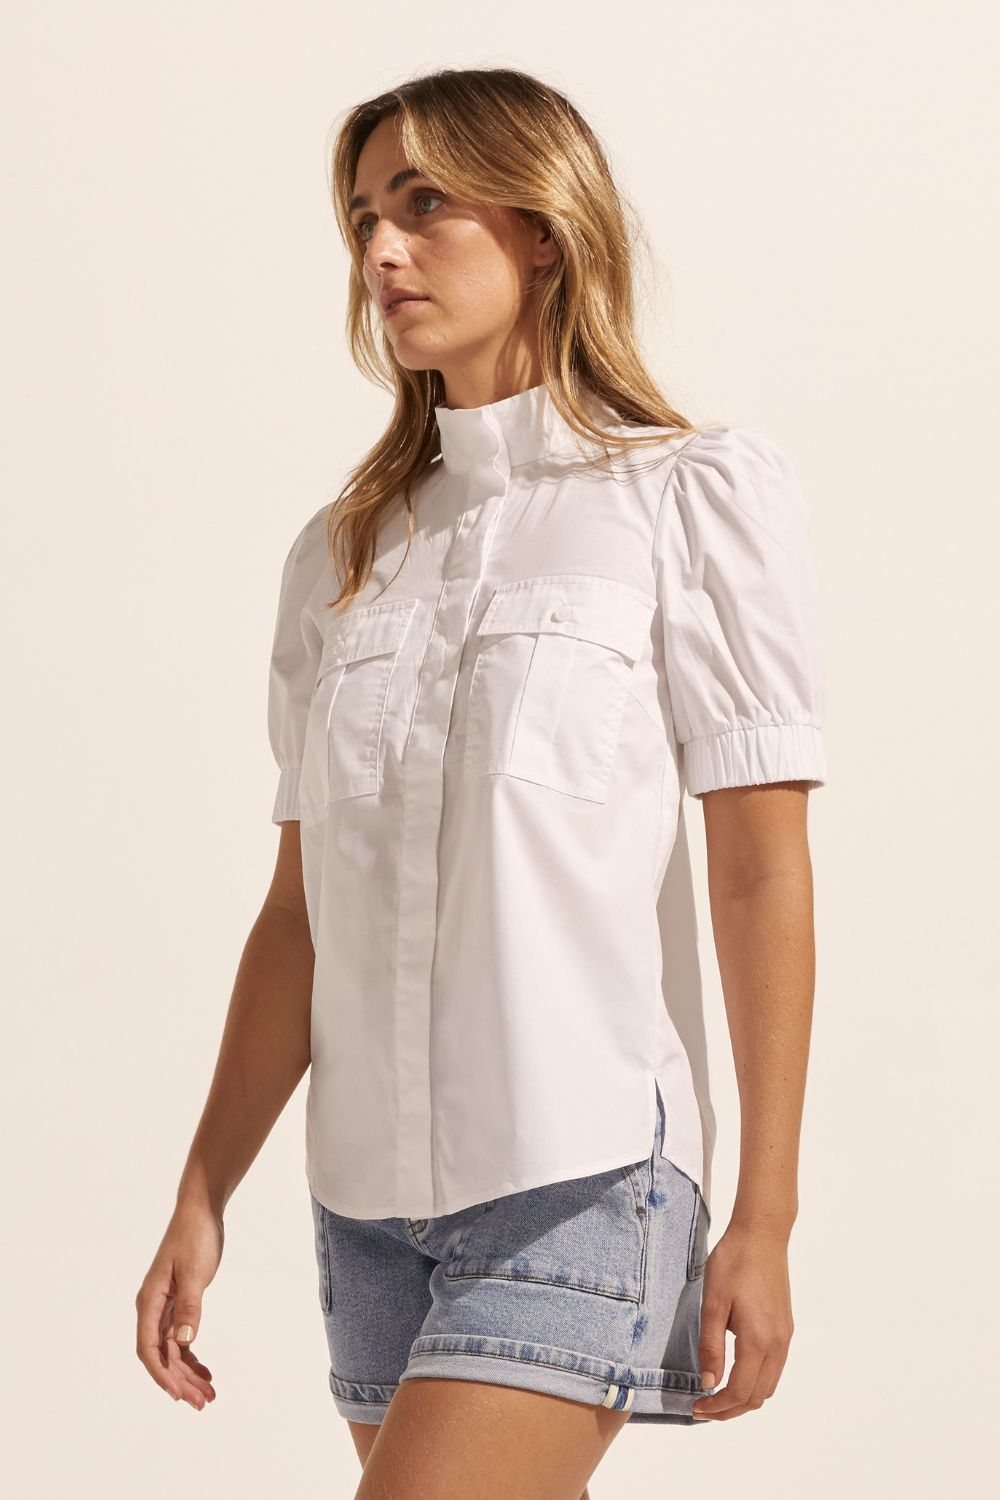 white, high neck, button up shirt, top, side view